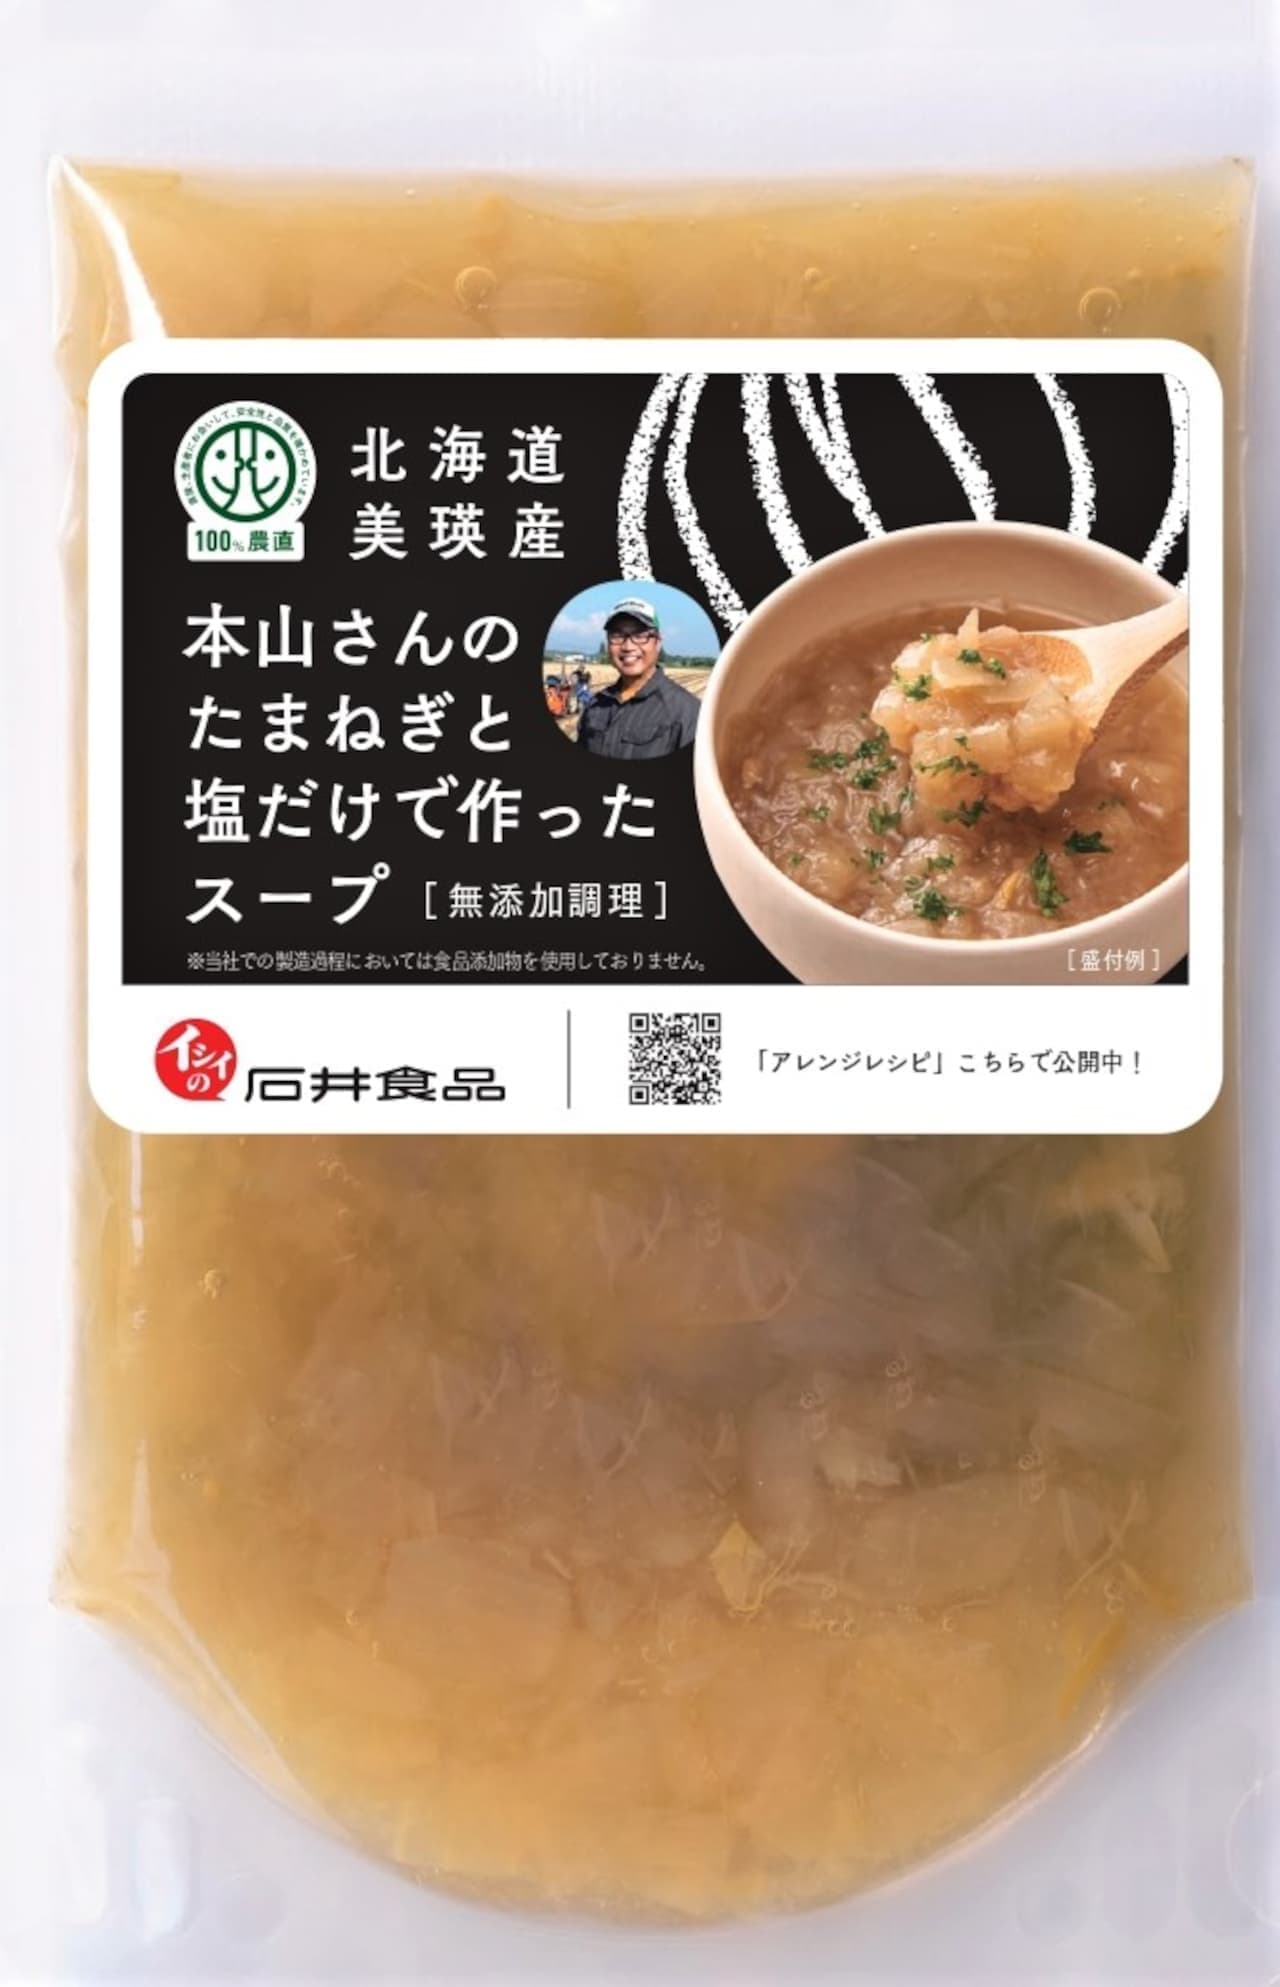 Ishii Food Co., Ltd. "Soup made only with onions and salt from Mr. Motoyama who grew up in Biei"